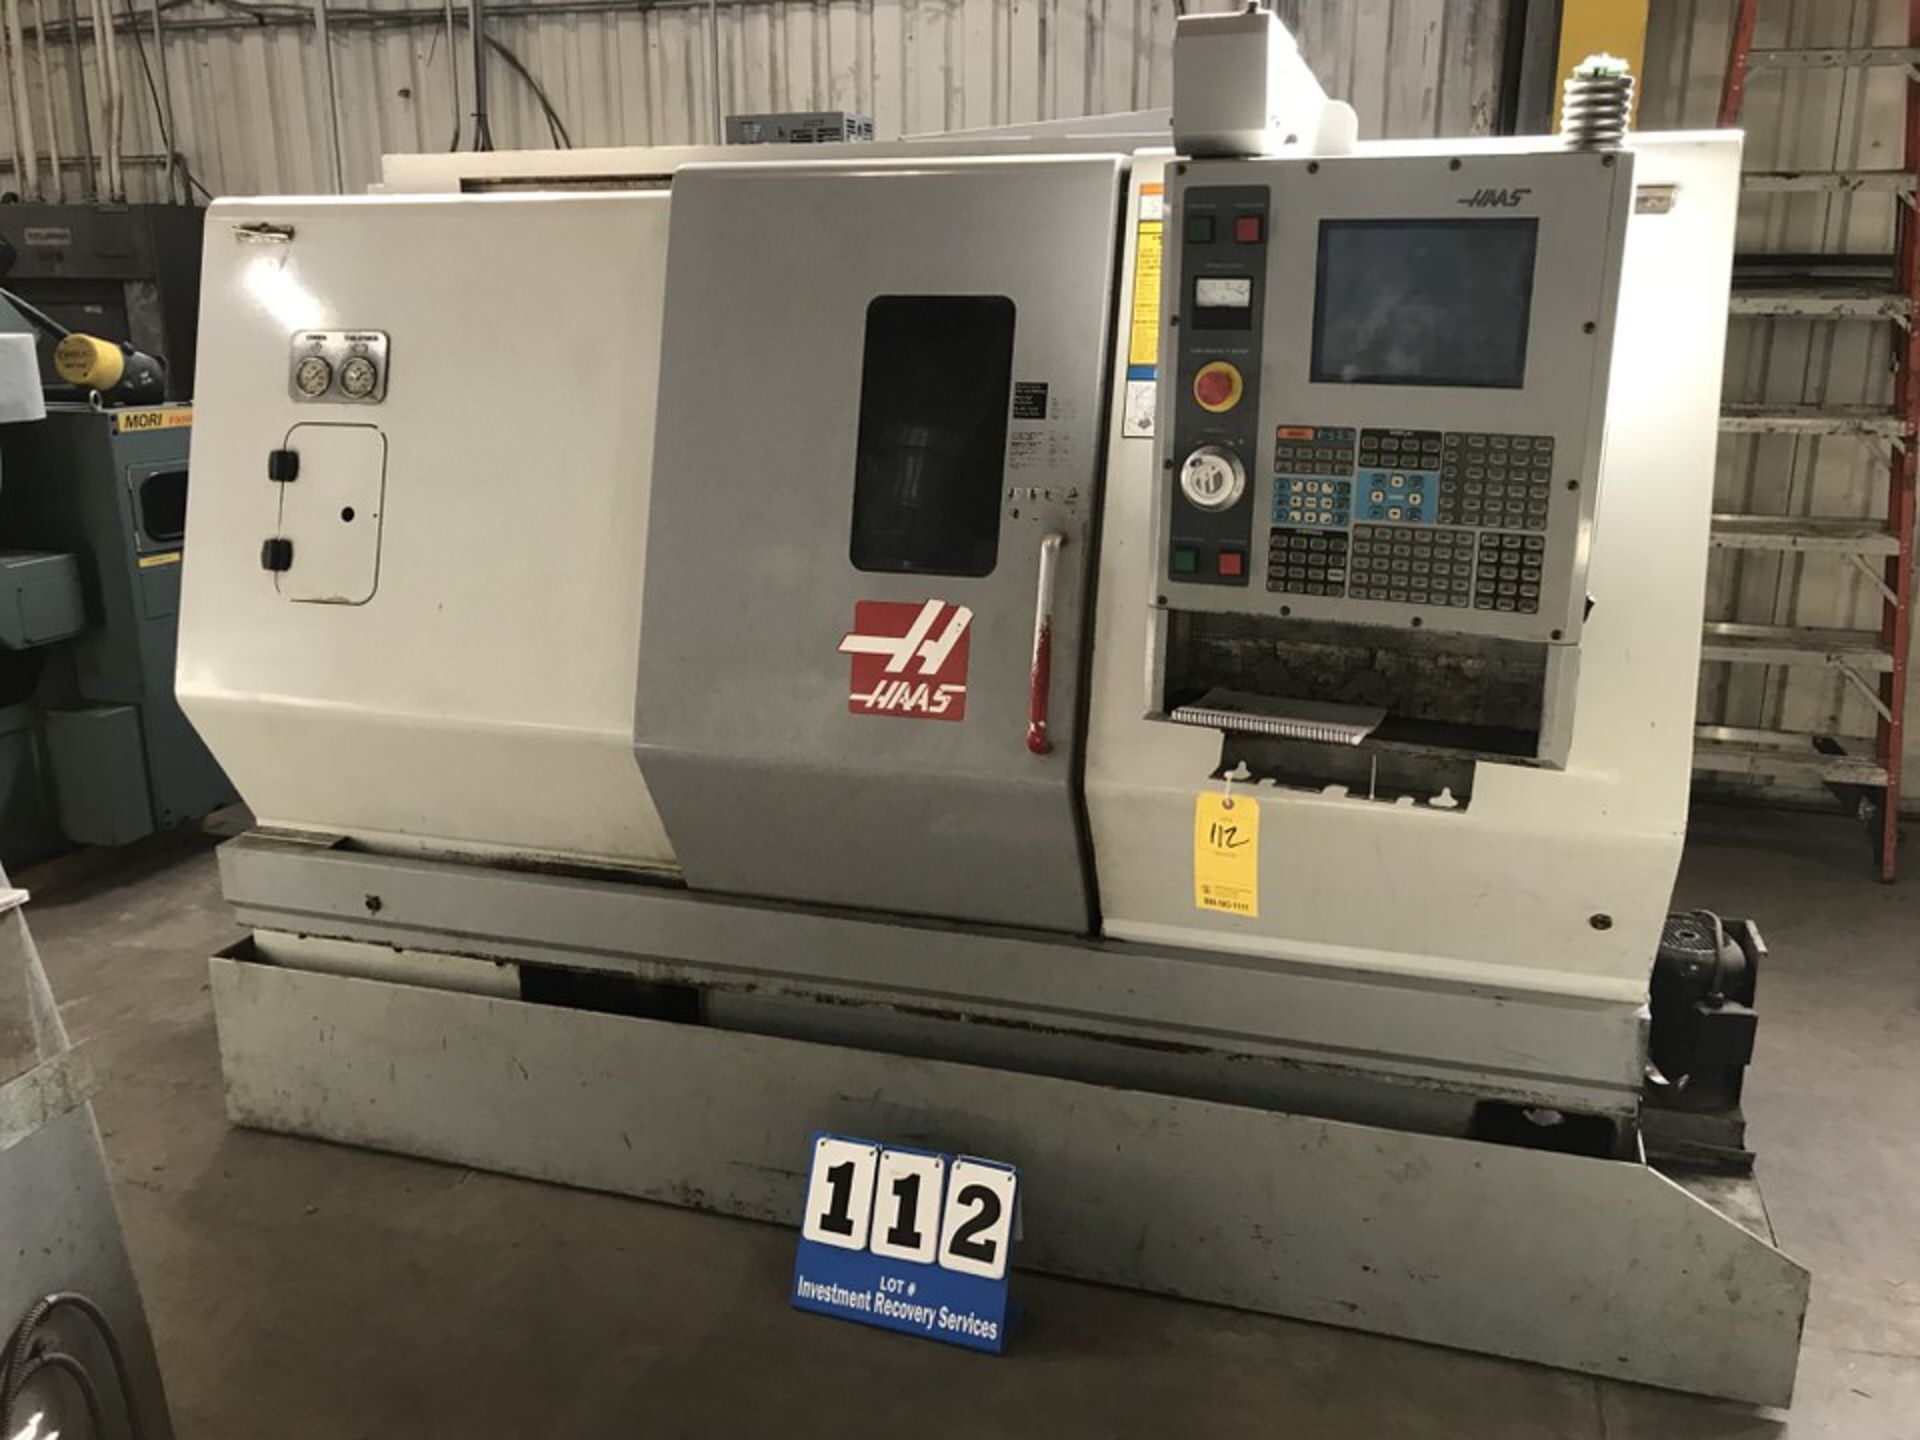 Haas SL-20 T CNC Lathe, Year: 2004, Turning DIa: 10.3”, Swing: 23”, Centers: 24”, X Axis Travel: 8.